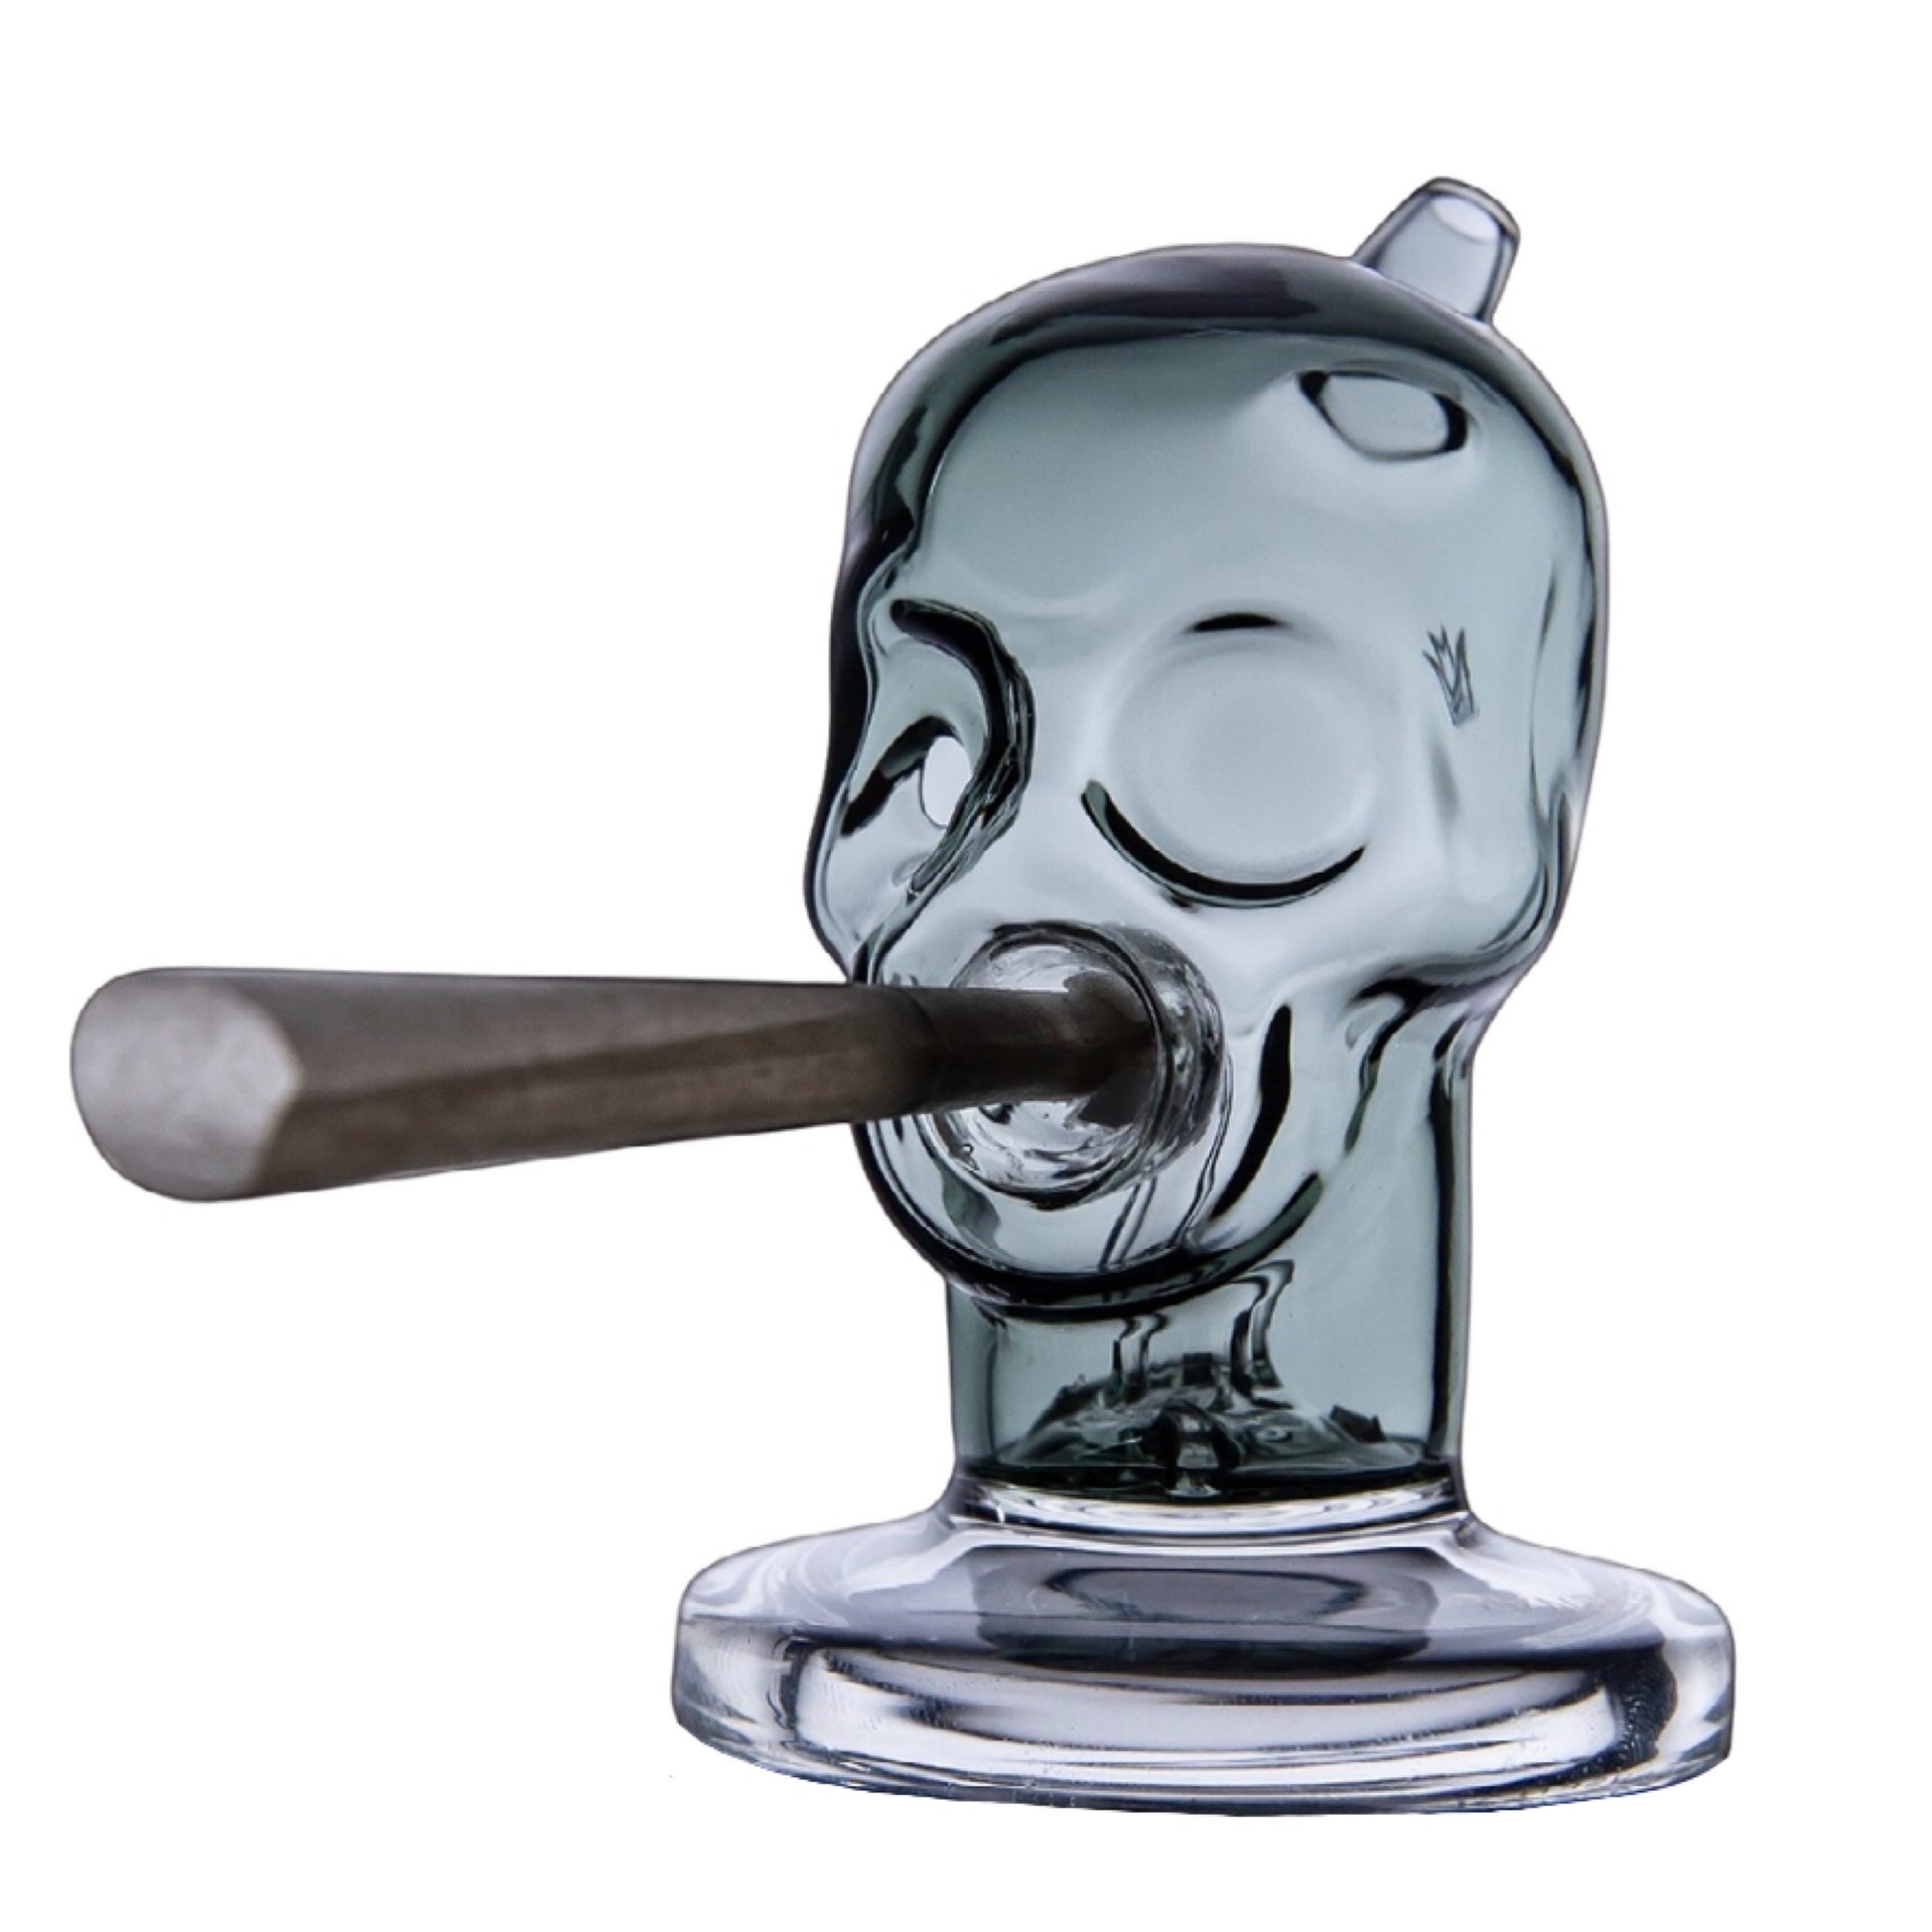 MJ Arsenal Limited Edition Rip'r Blunt Bubbler 💀 by MJ Arsenal | Mission Dispensary